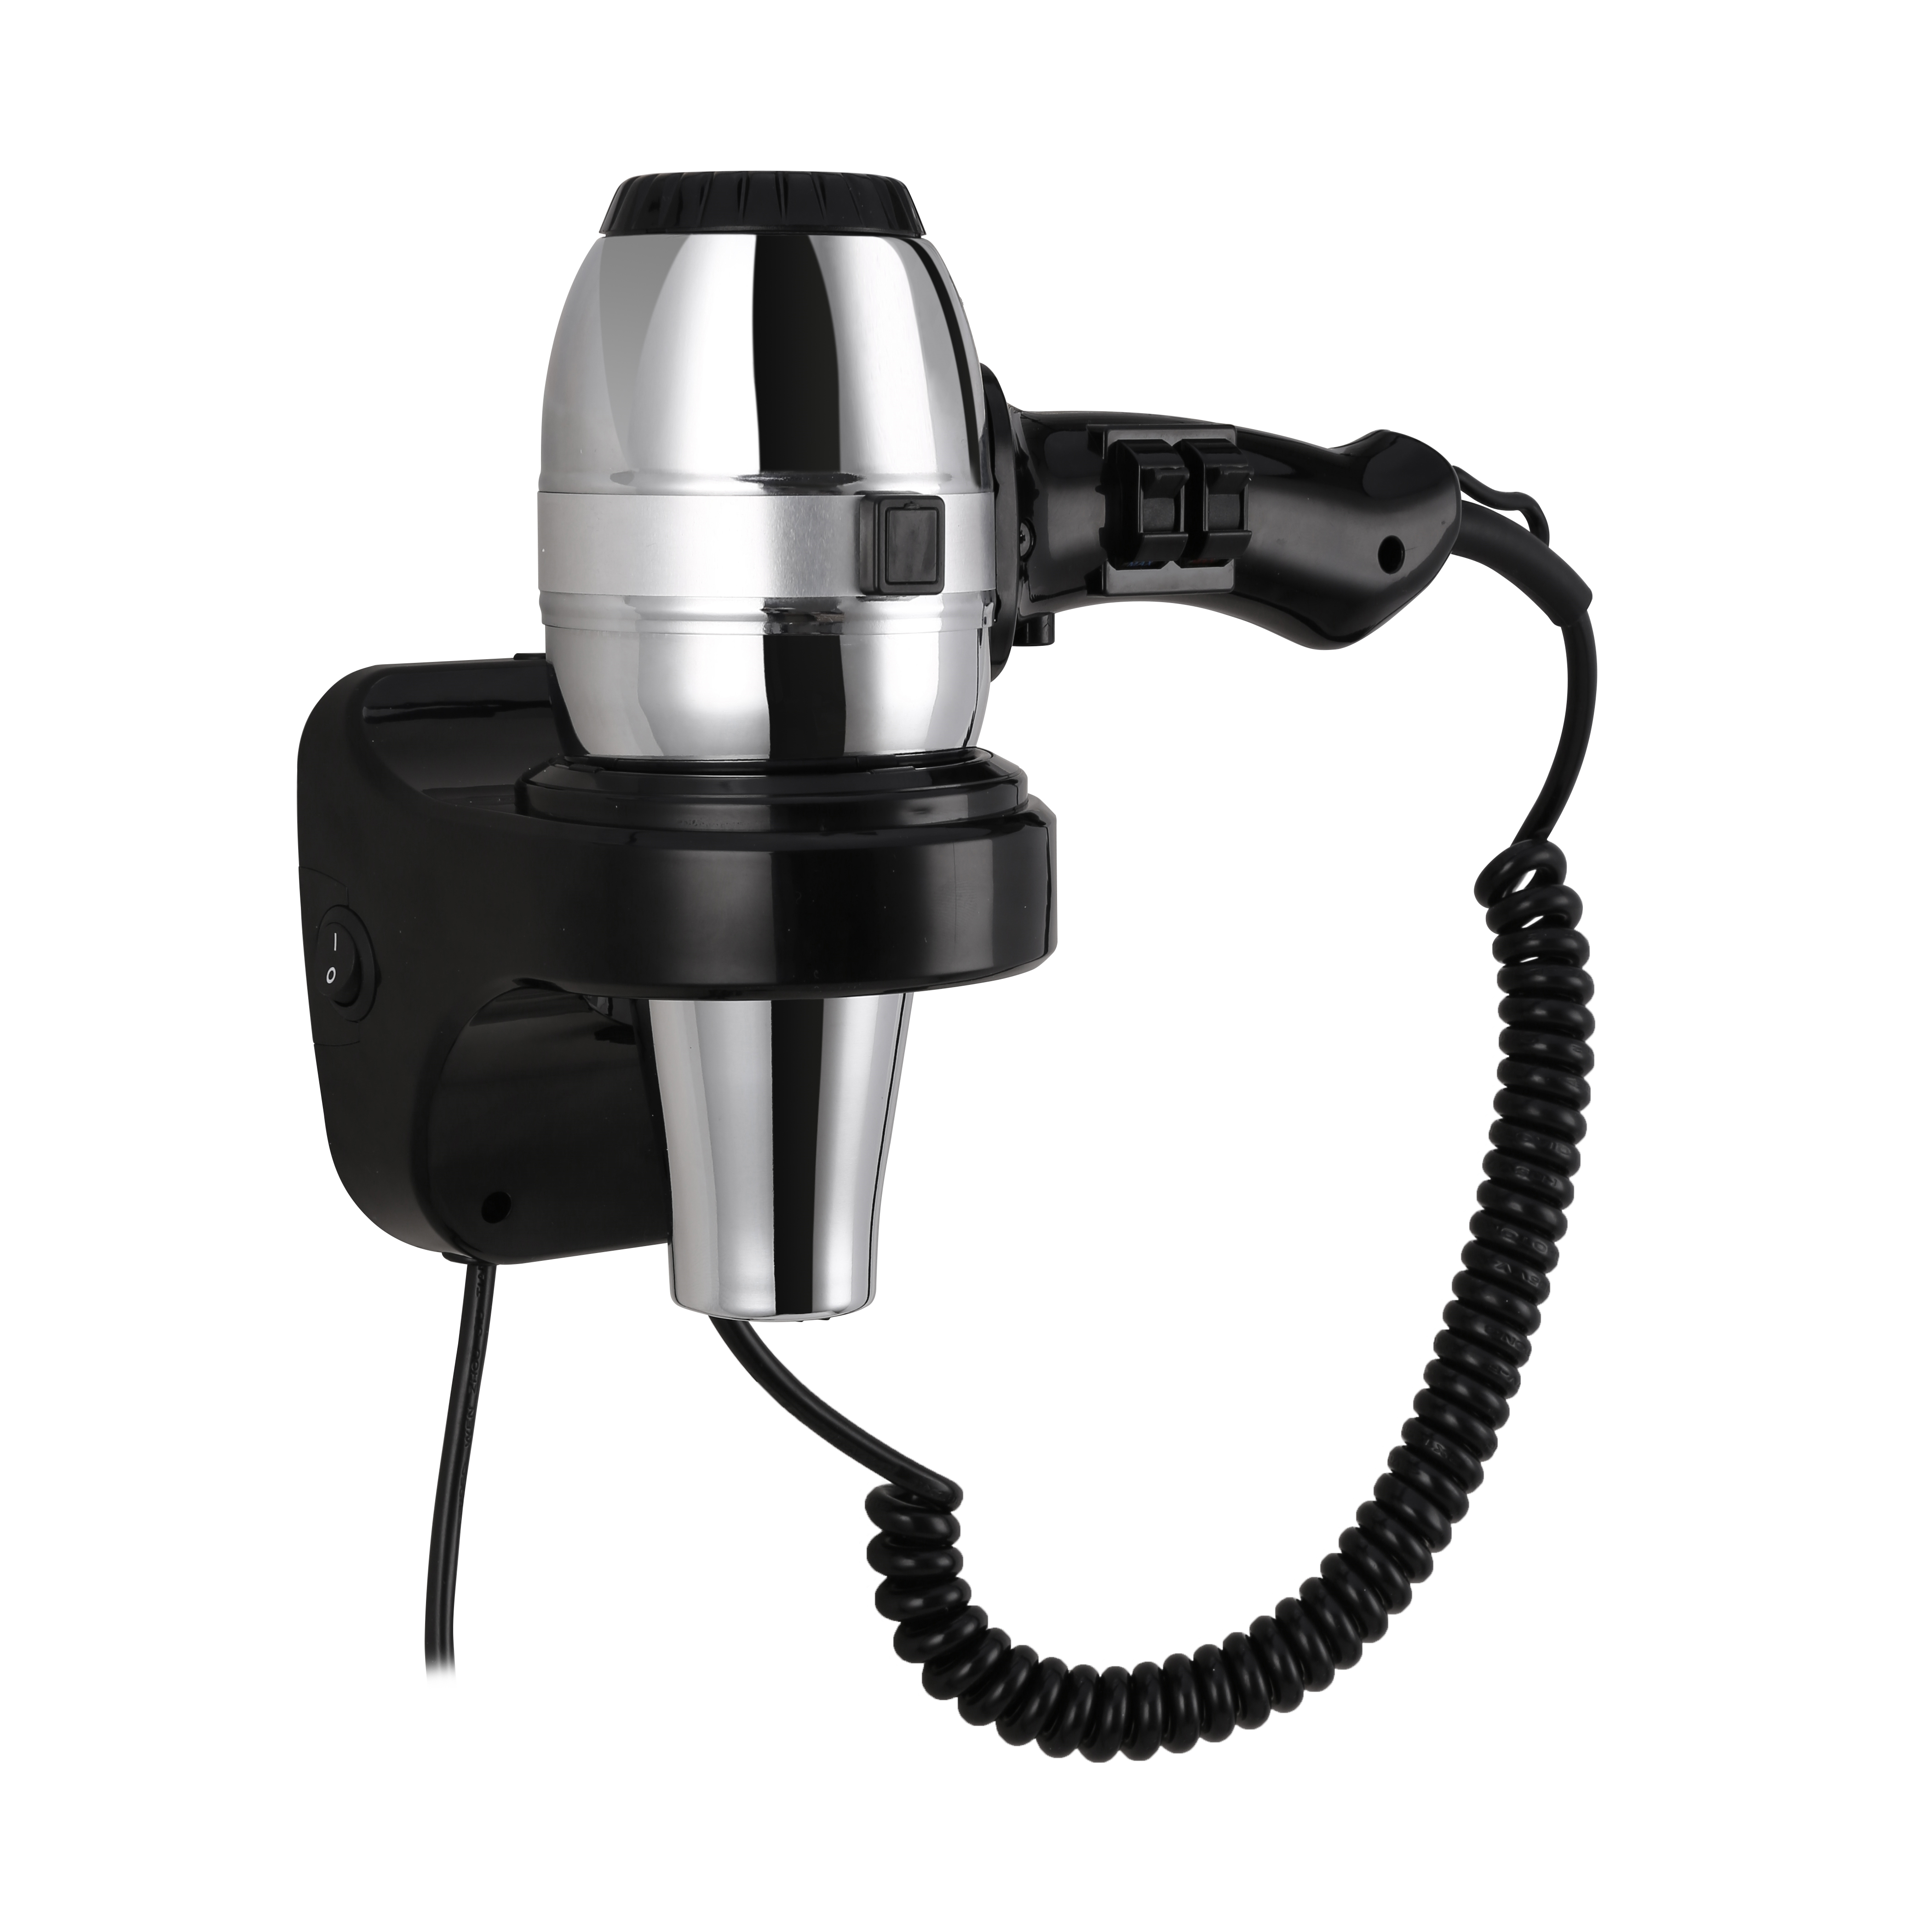 Wall Mount Hair Dryer in Lagos Island - Salon Equipment, Ifex Global Ltd  Ifechukwu | Find more Salon Equipment services online from olist.ng